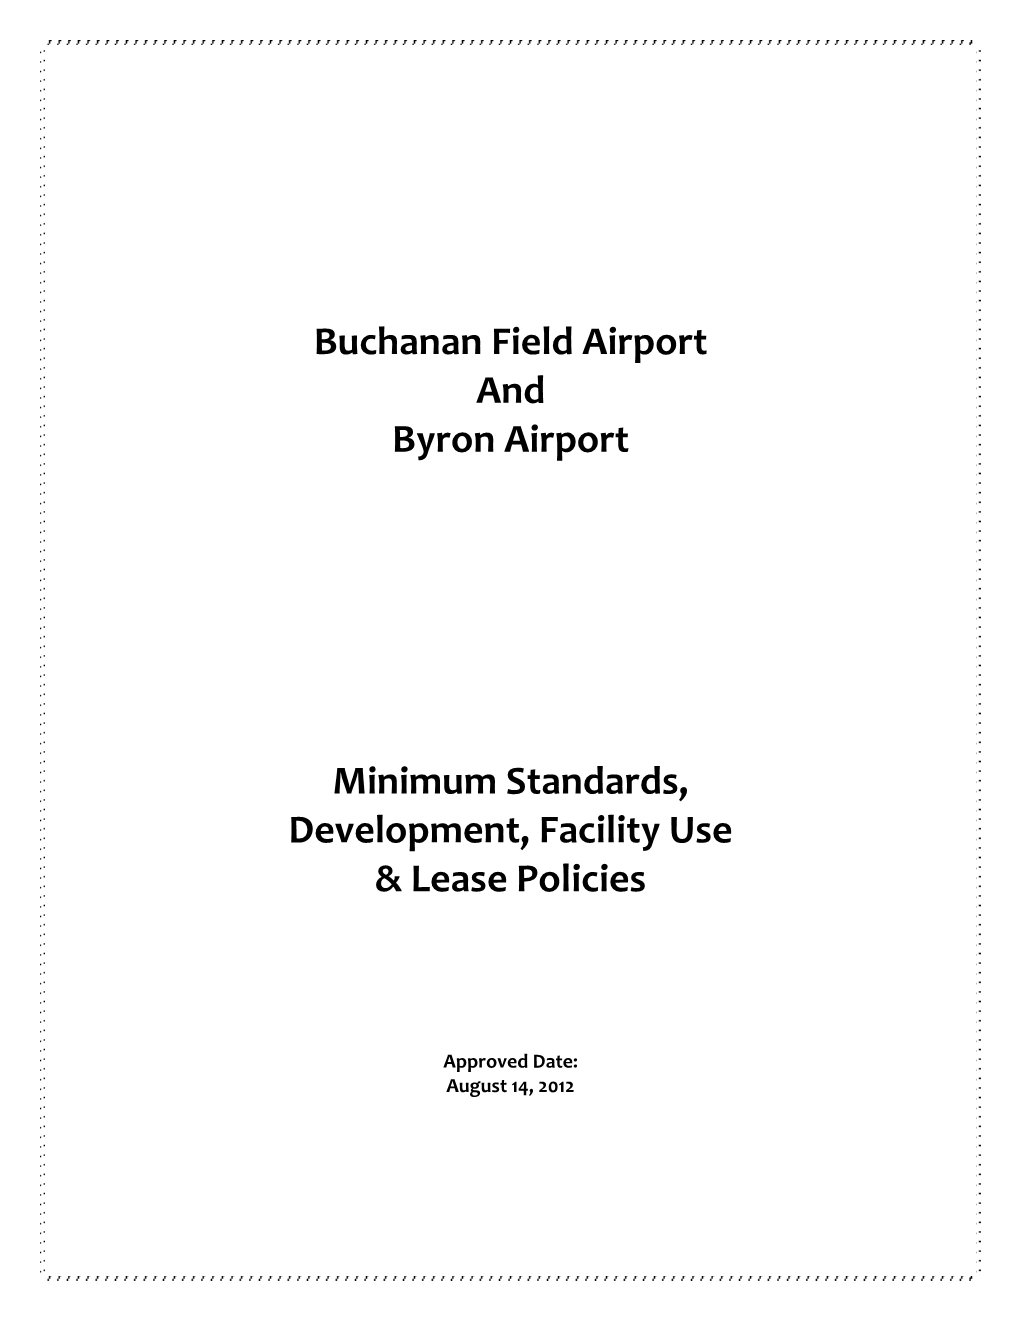 Buchanan Field Airport and Byron Airport Minimum Standards, Development, Facility Use & Lease Policies